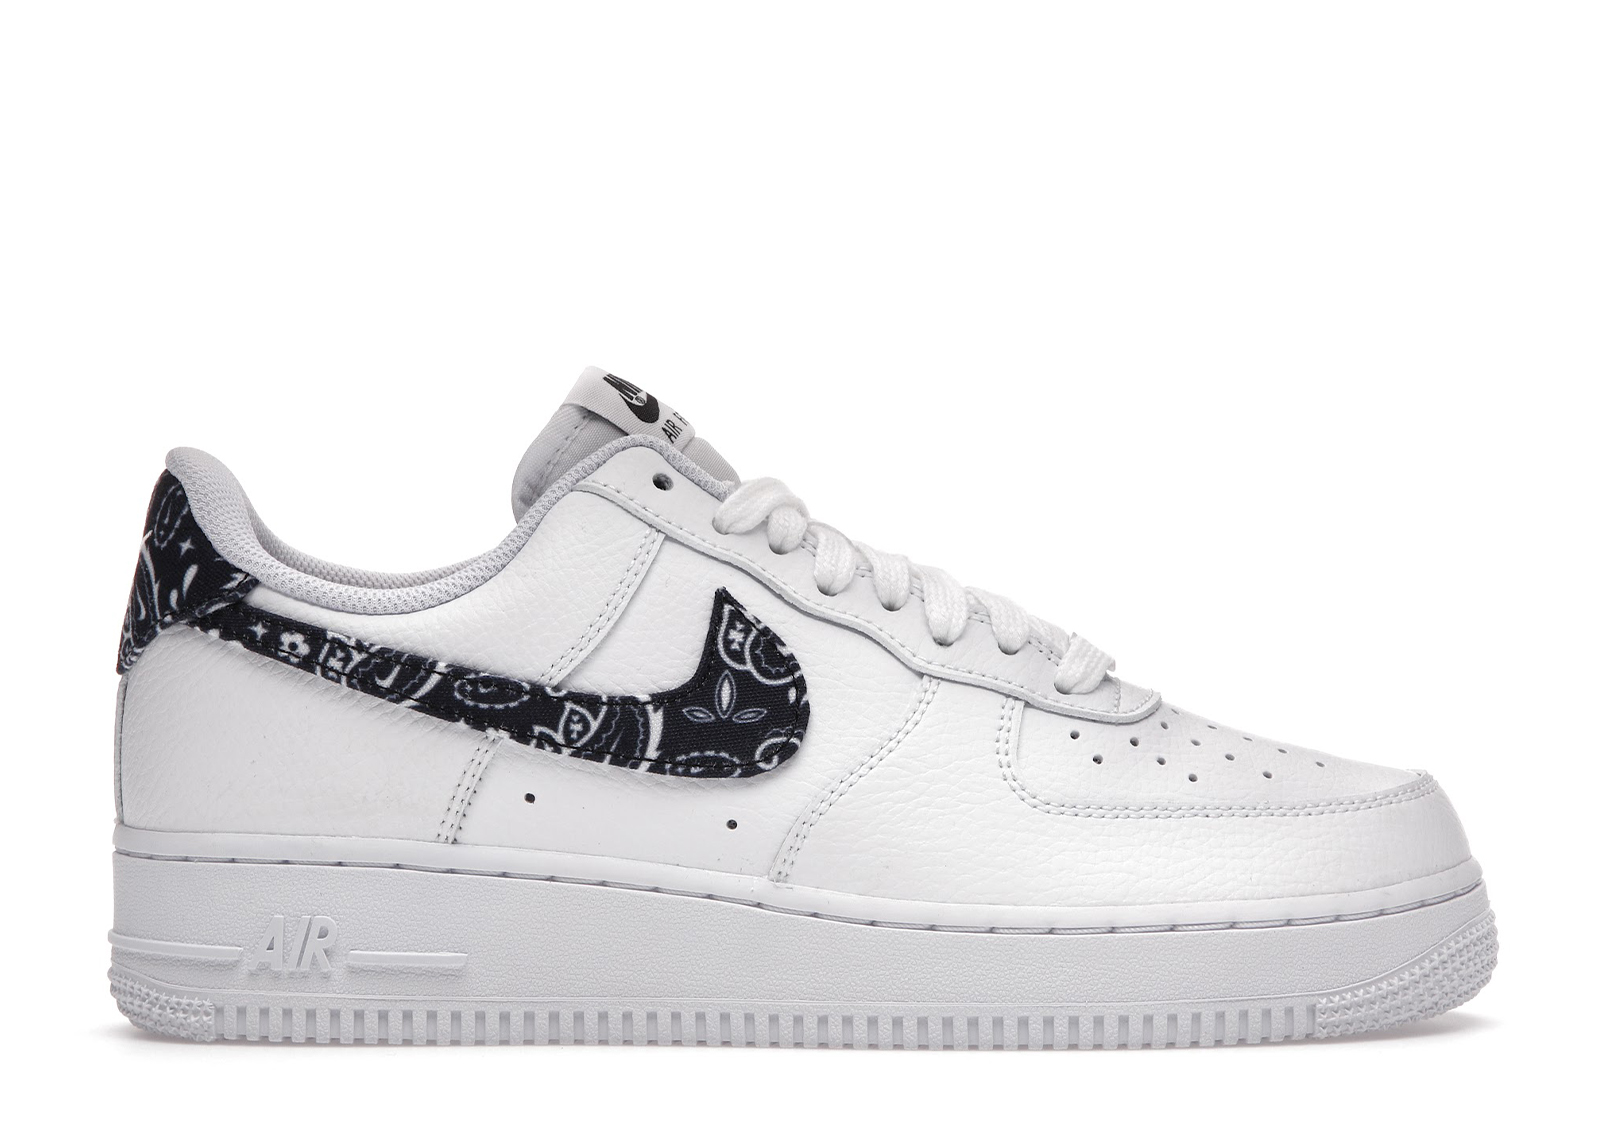 Nike Air Force 1 Low '07 Essential White Black Paisley (Women's 